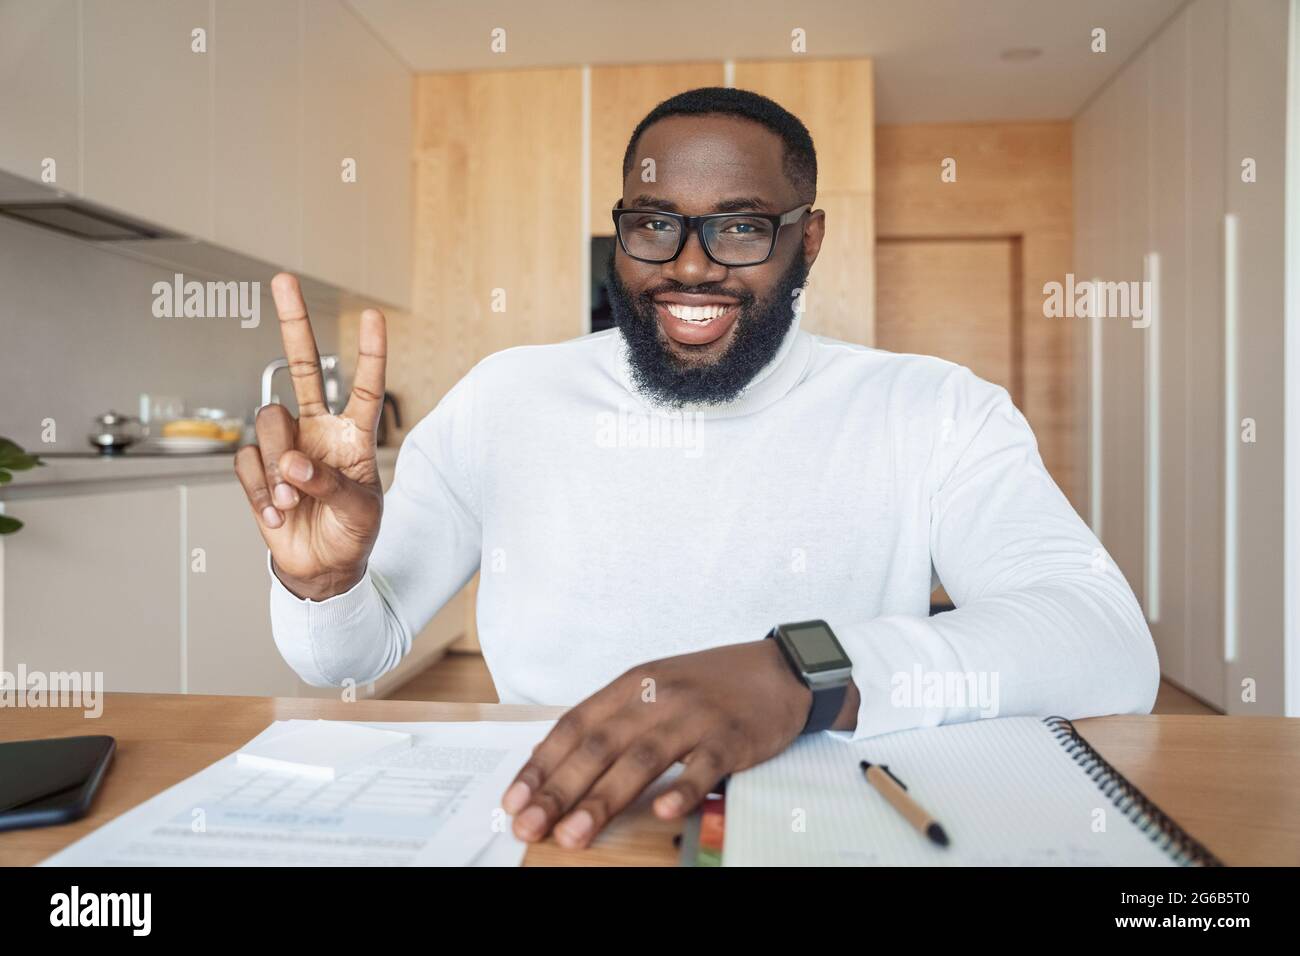 Portrait of glad excited man coach or student showing v-sign smiling at camera Stock Photo